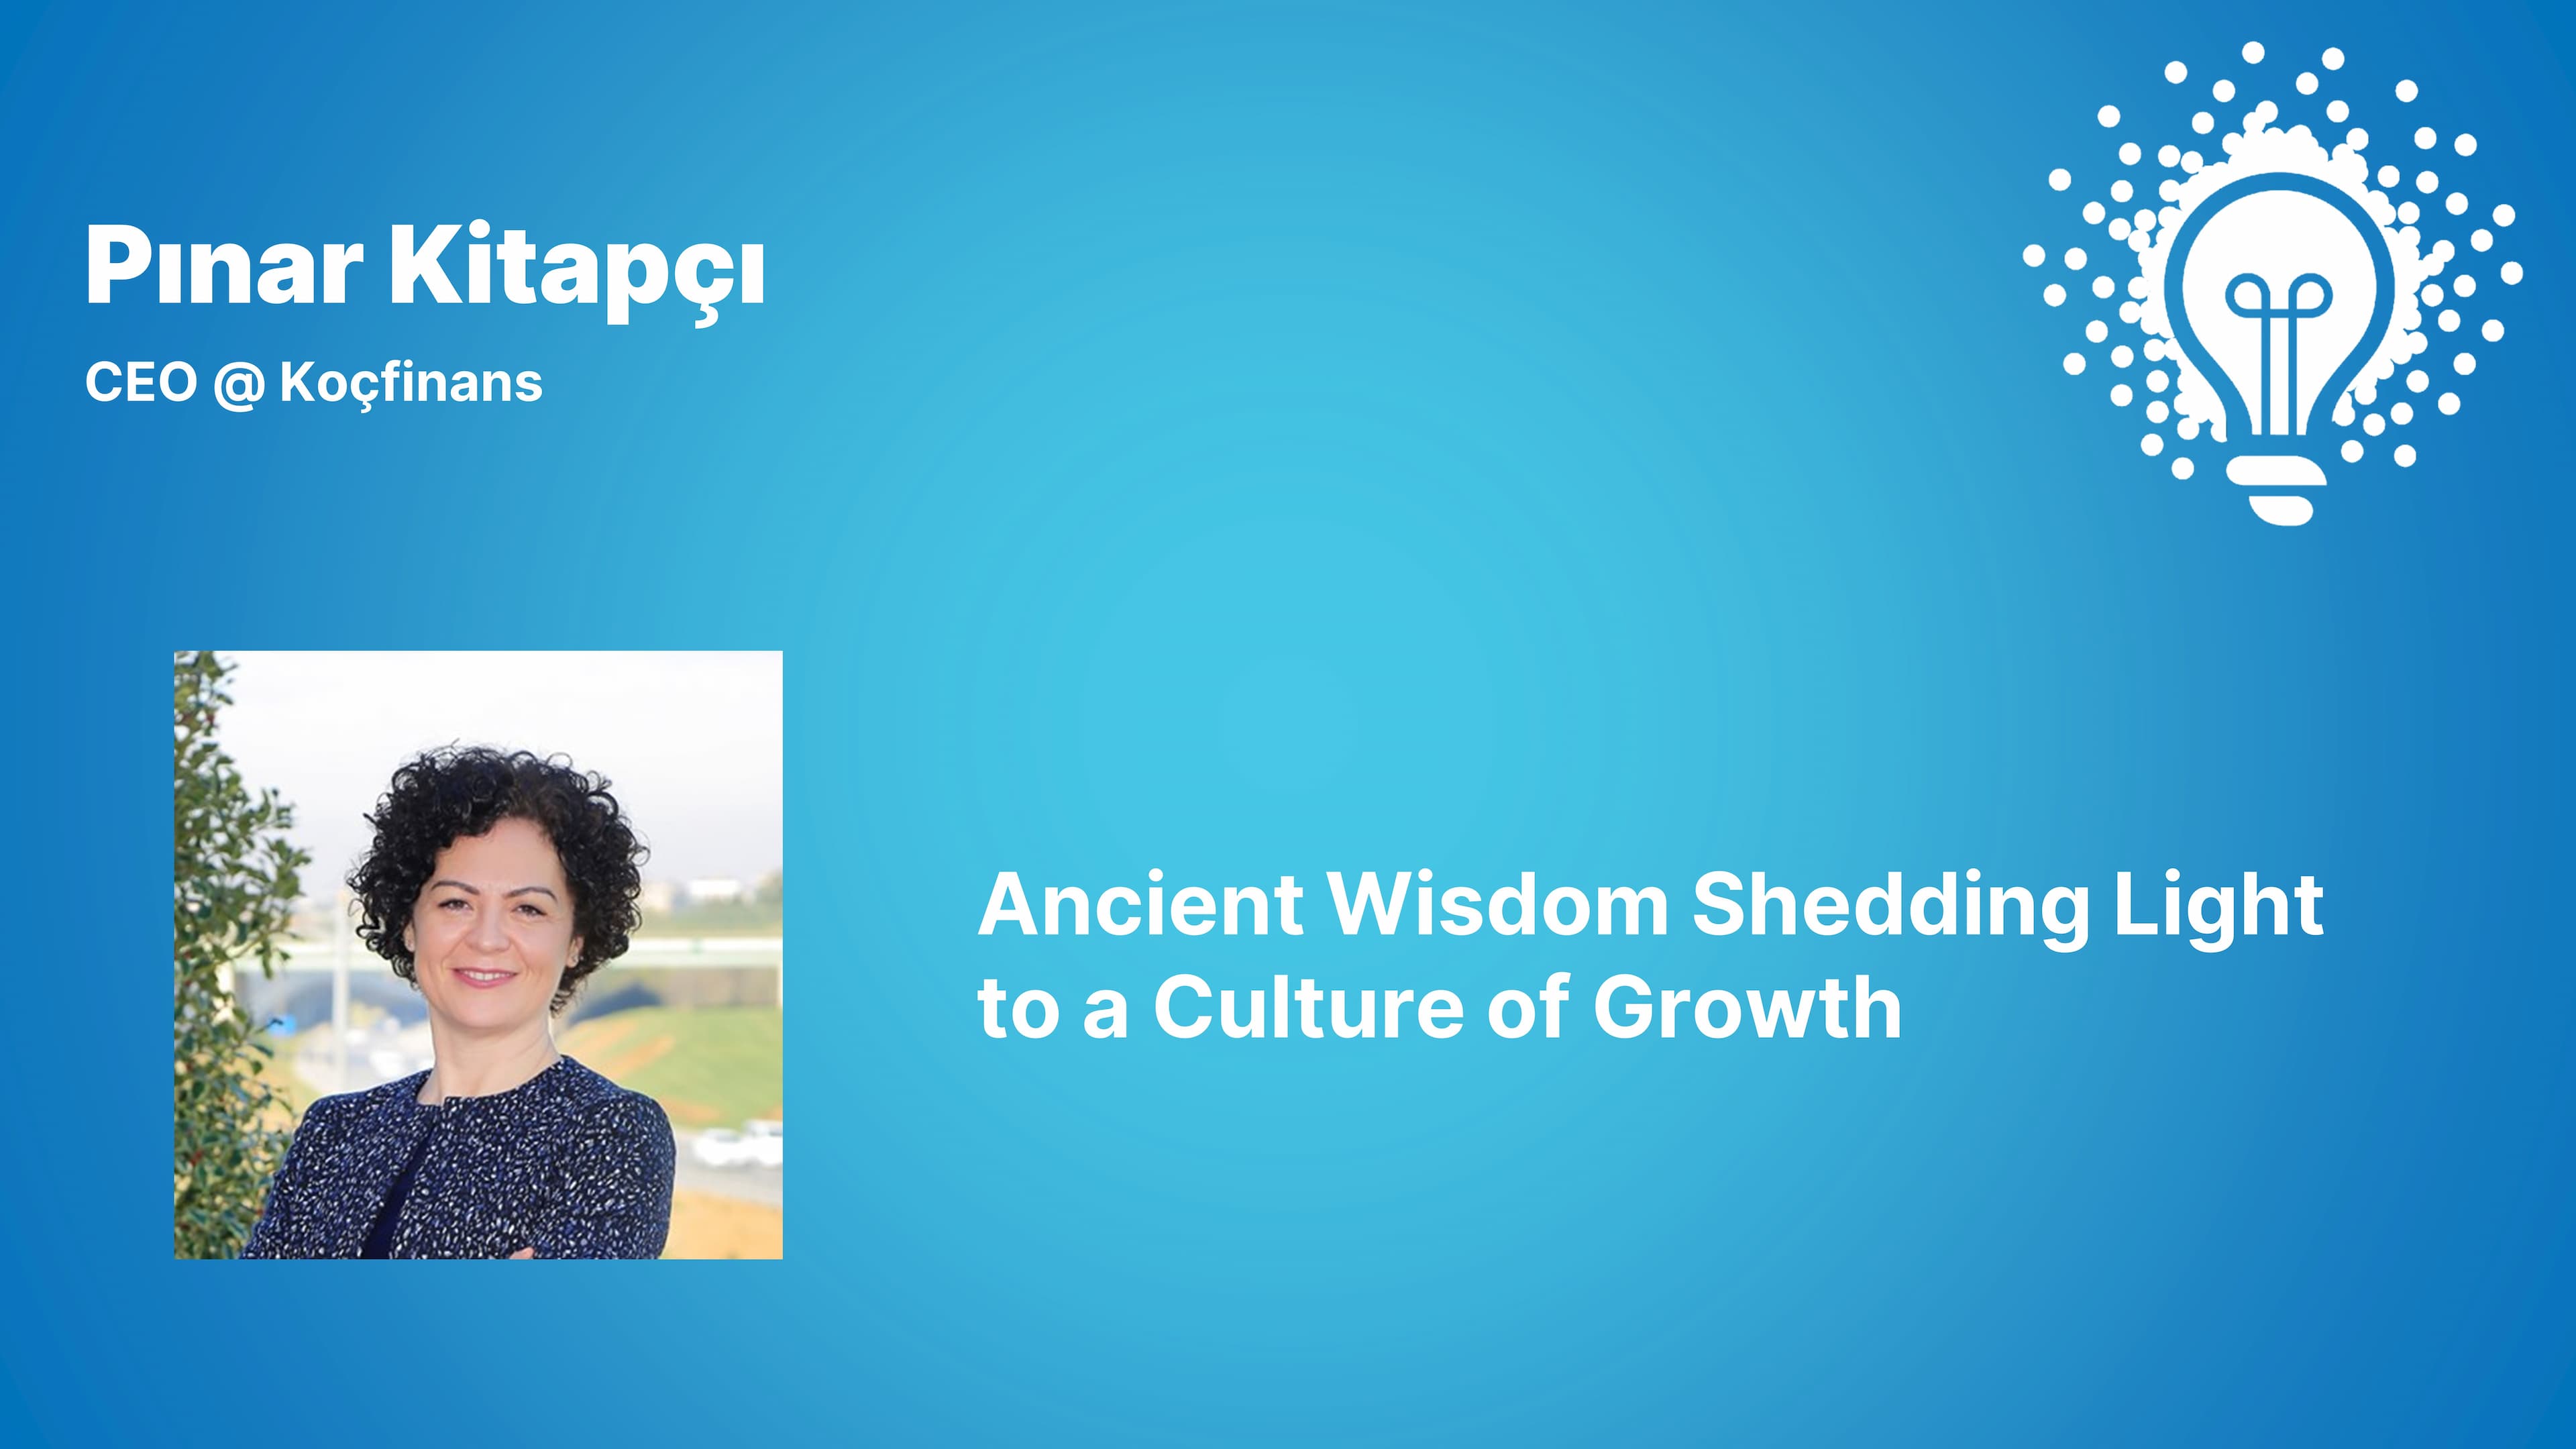 Ancient Wisdom Shedding Light to a Culture of Growth